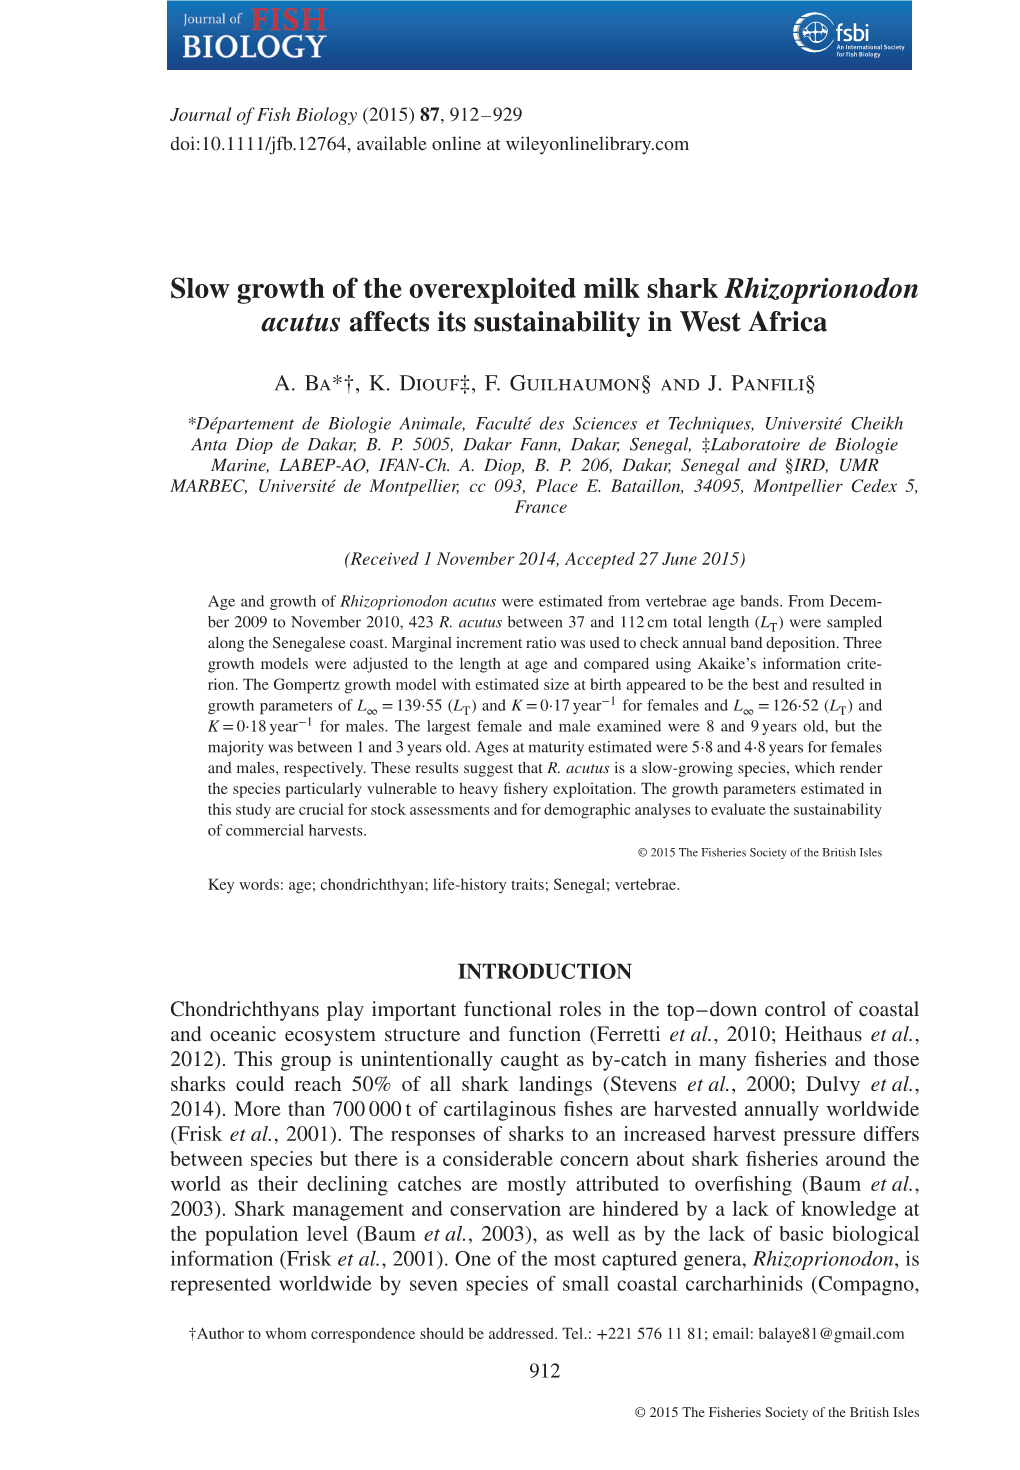 Slow Growth of the Overexploited Milk Shark Rhizoprionodon Acutus Affects Its Sustainability in West Africa